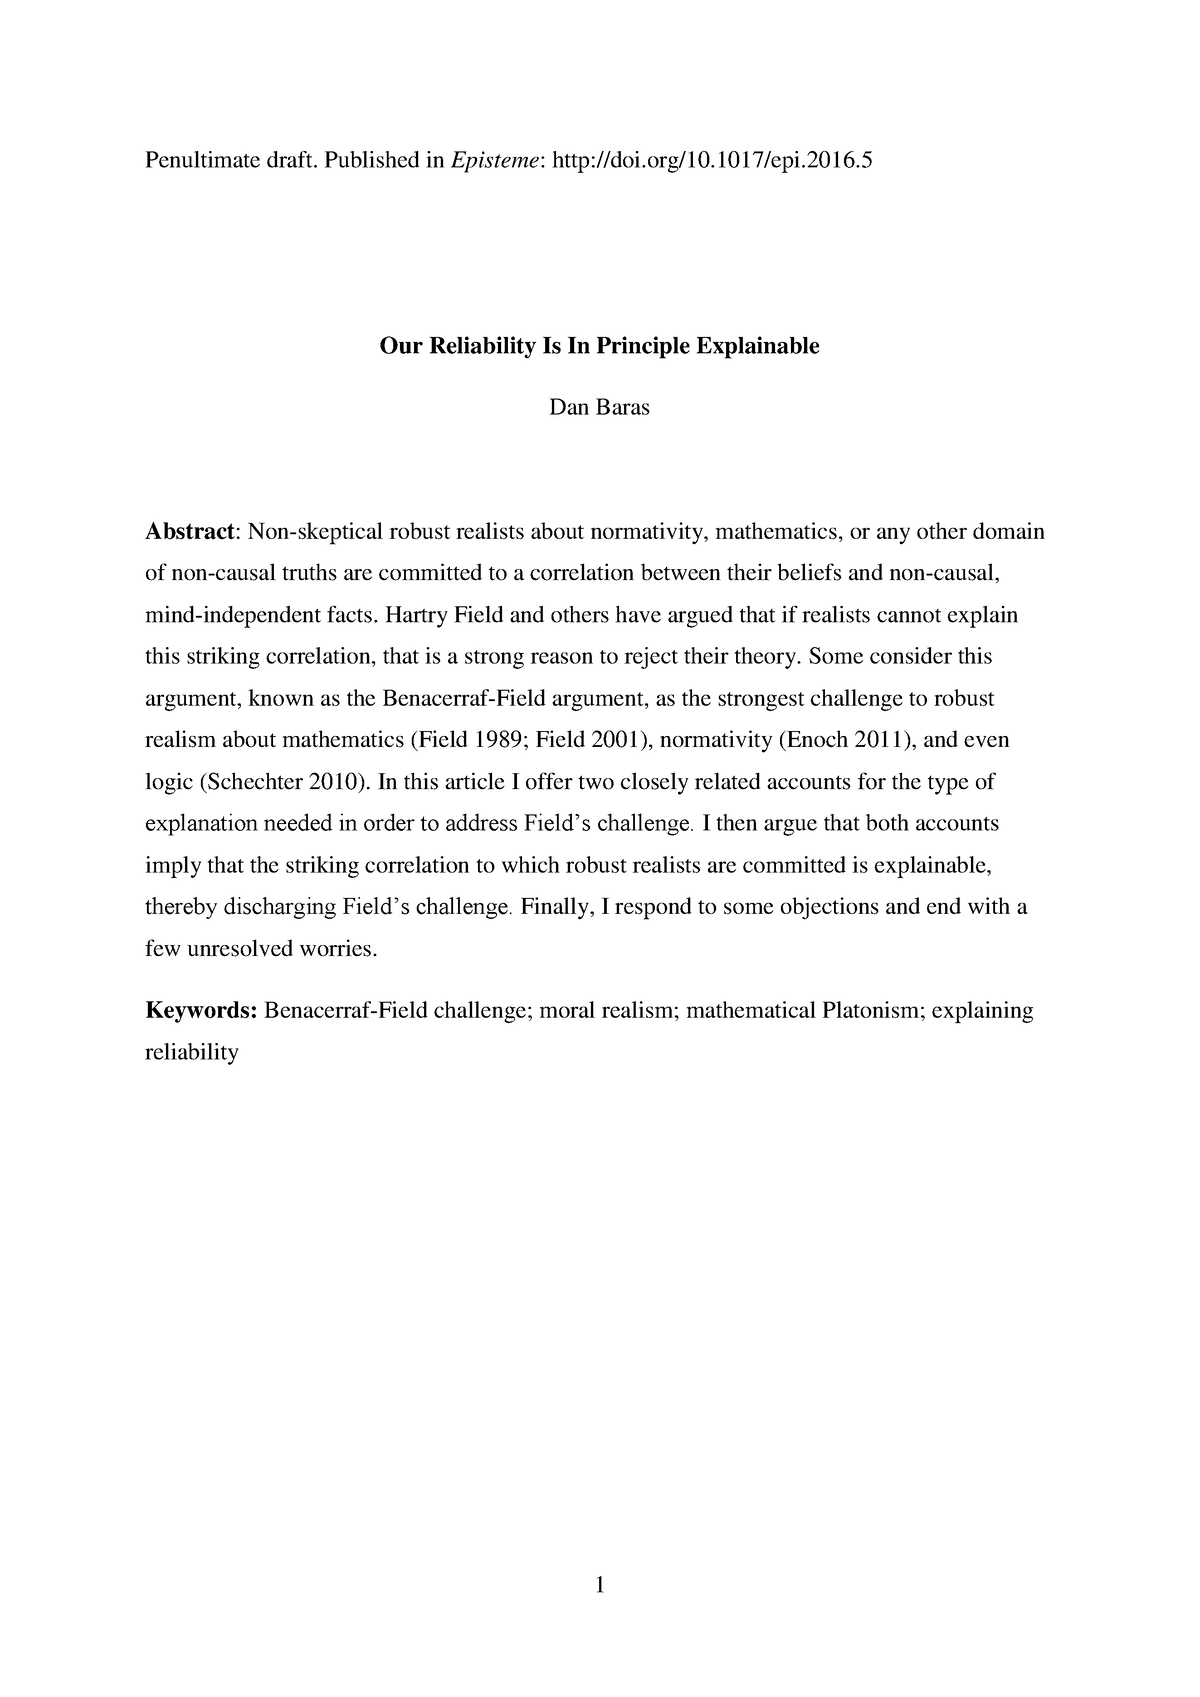 Our Reliability Is In Principle Explaina - Penultimate draft. Published ...